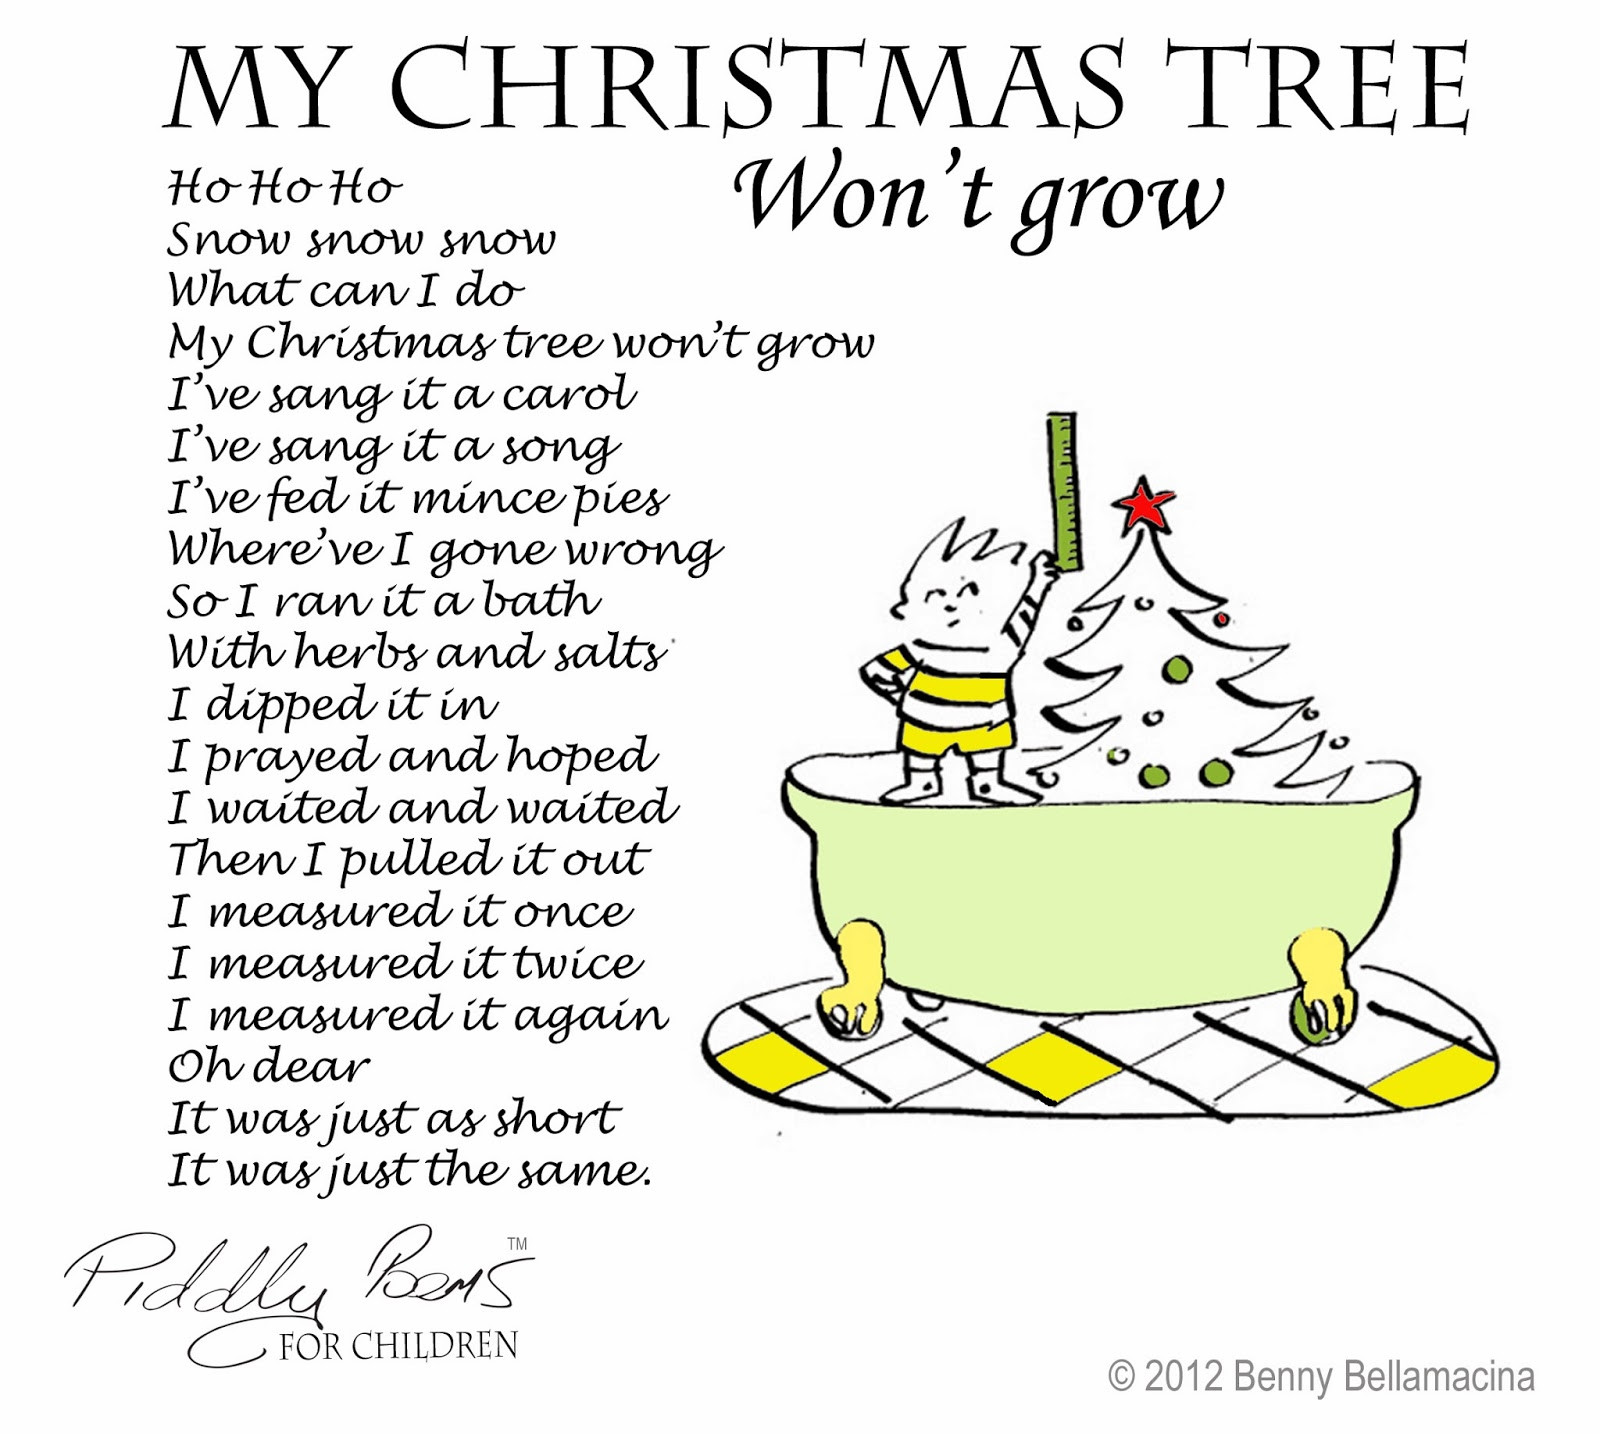 Funny Rhyming Quotes
 Piddly poems 2013 12 01